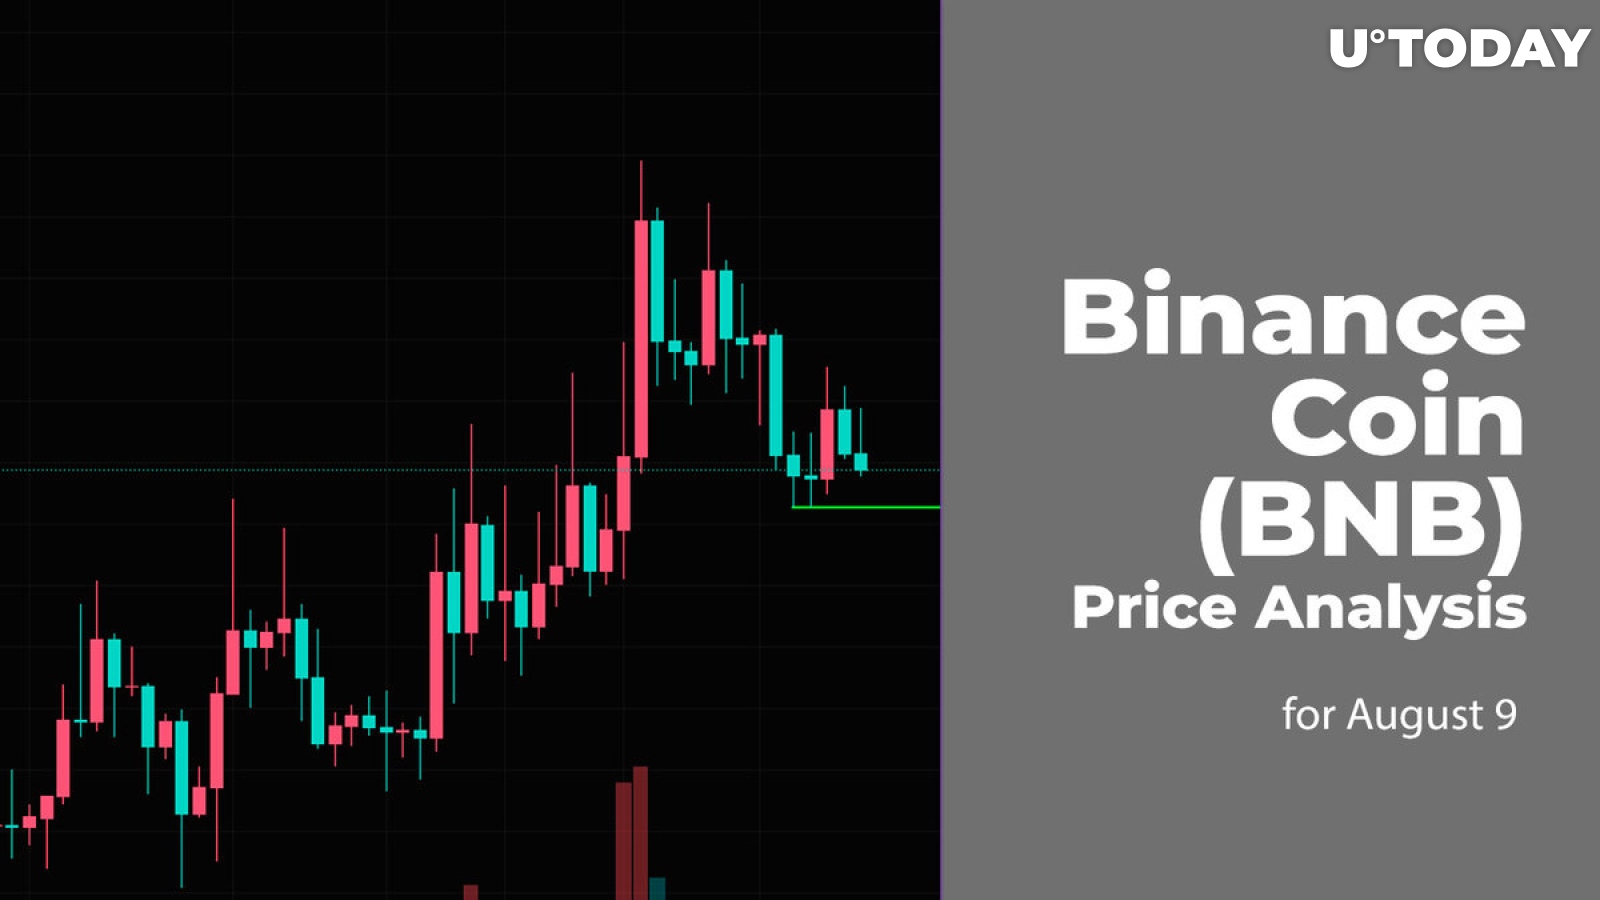 Binance Coin (BNB) Price Analysis for August 9